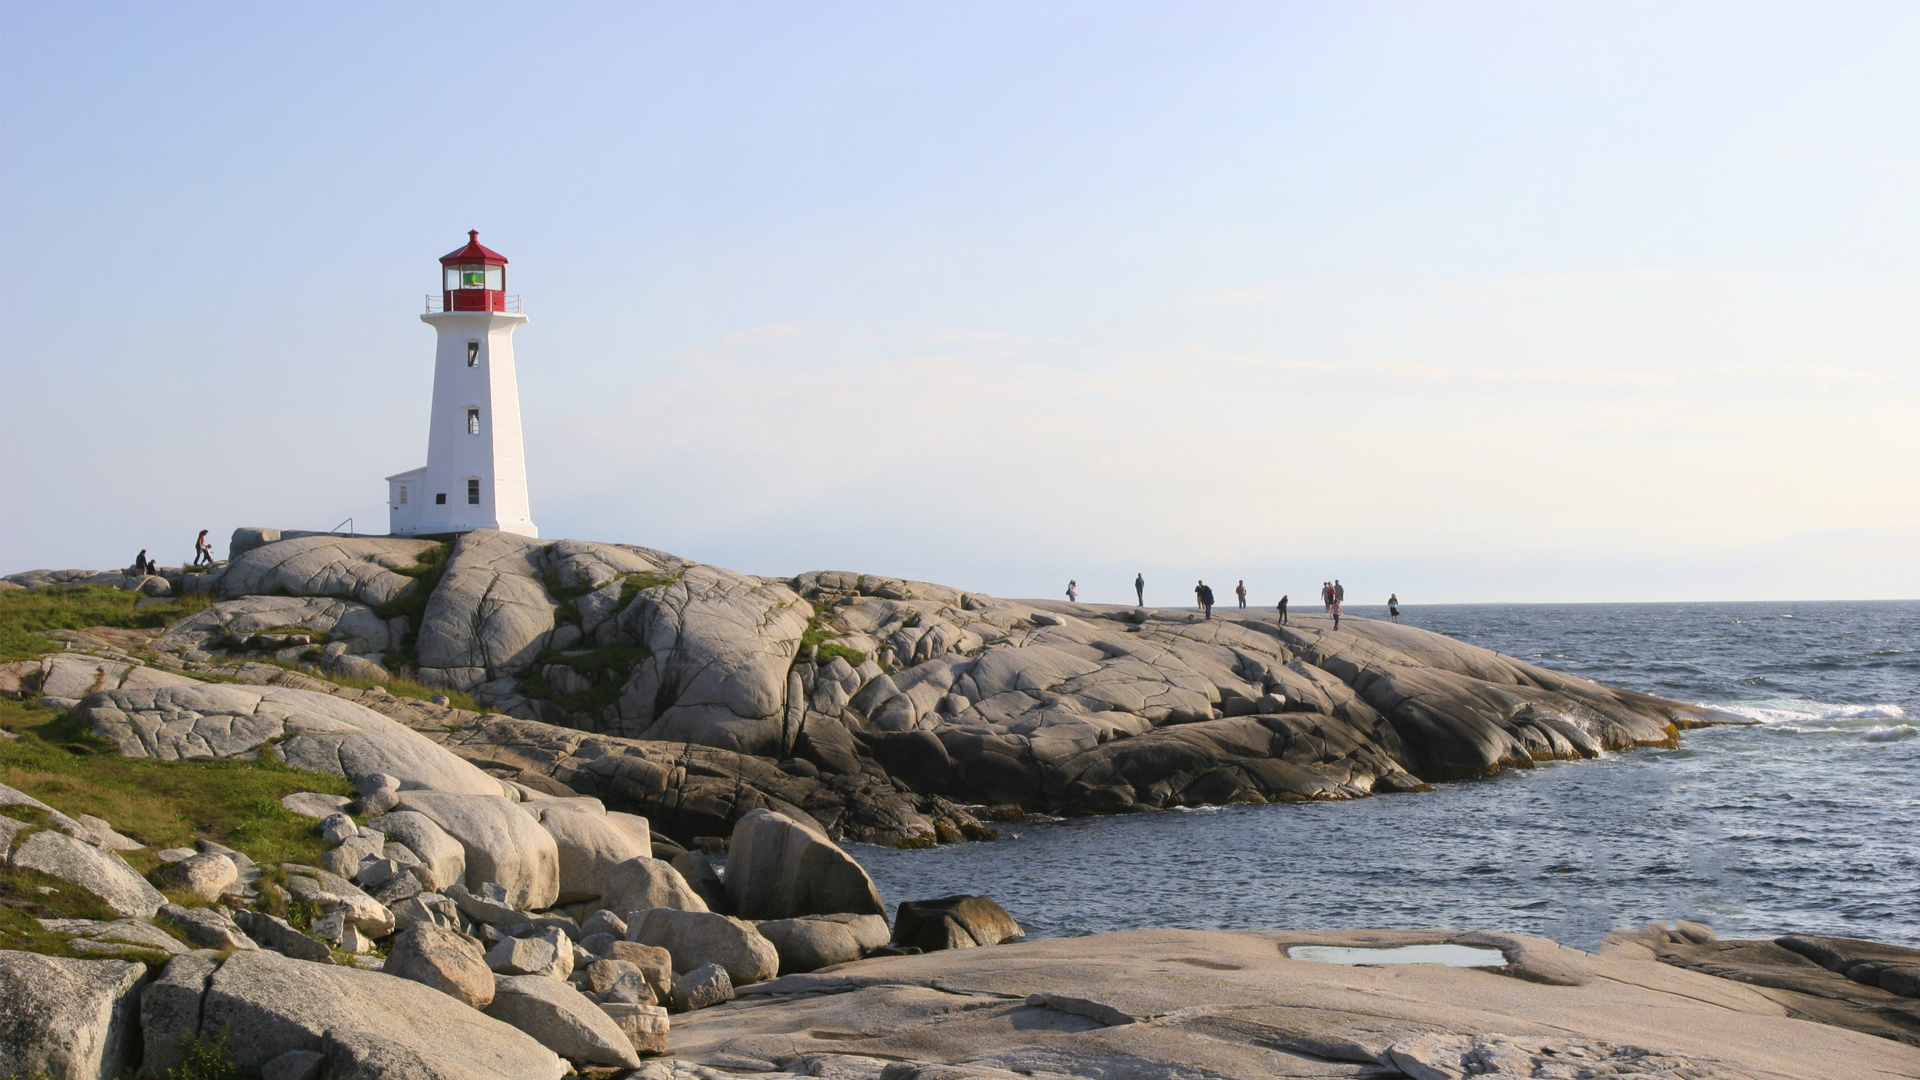 A lighthouse stands on a rocky shore